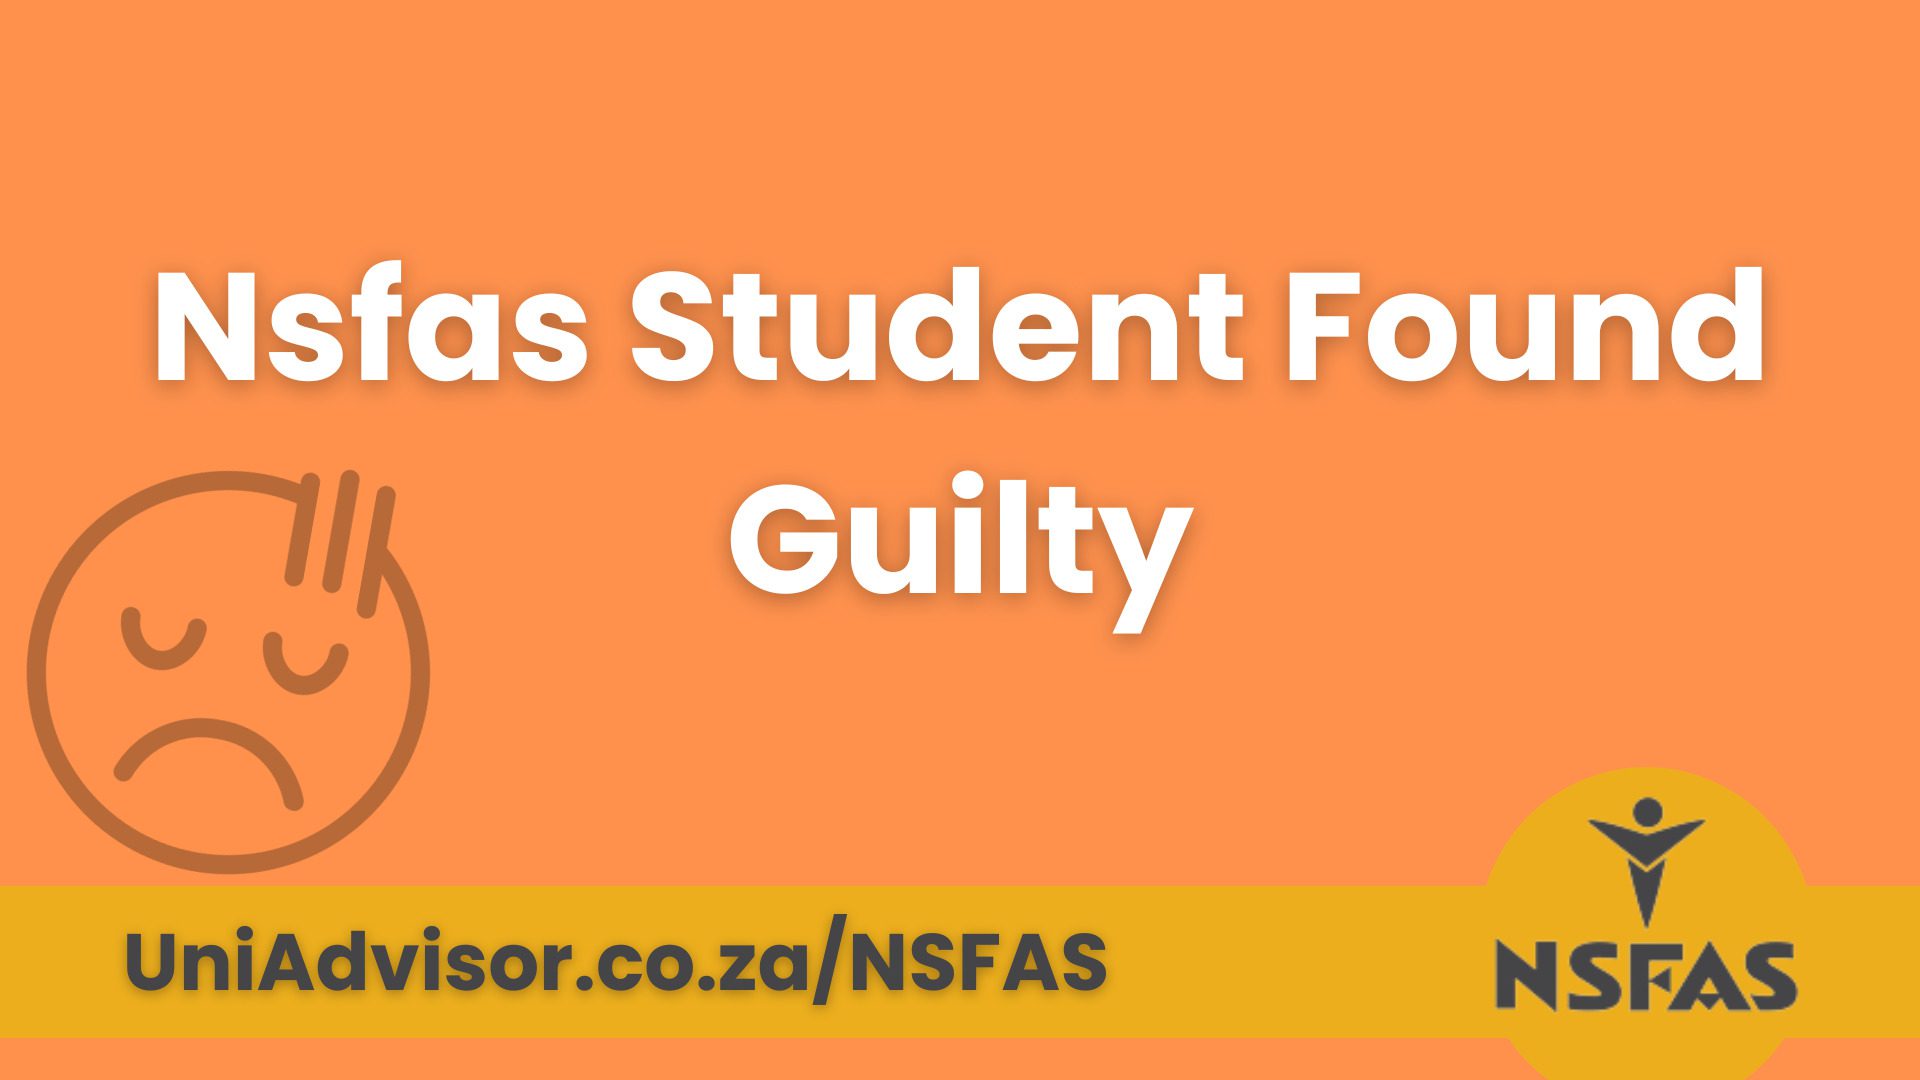 nsfas student found guilty